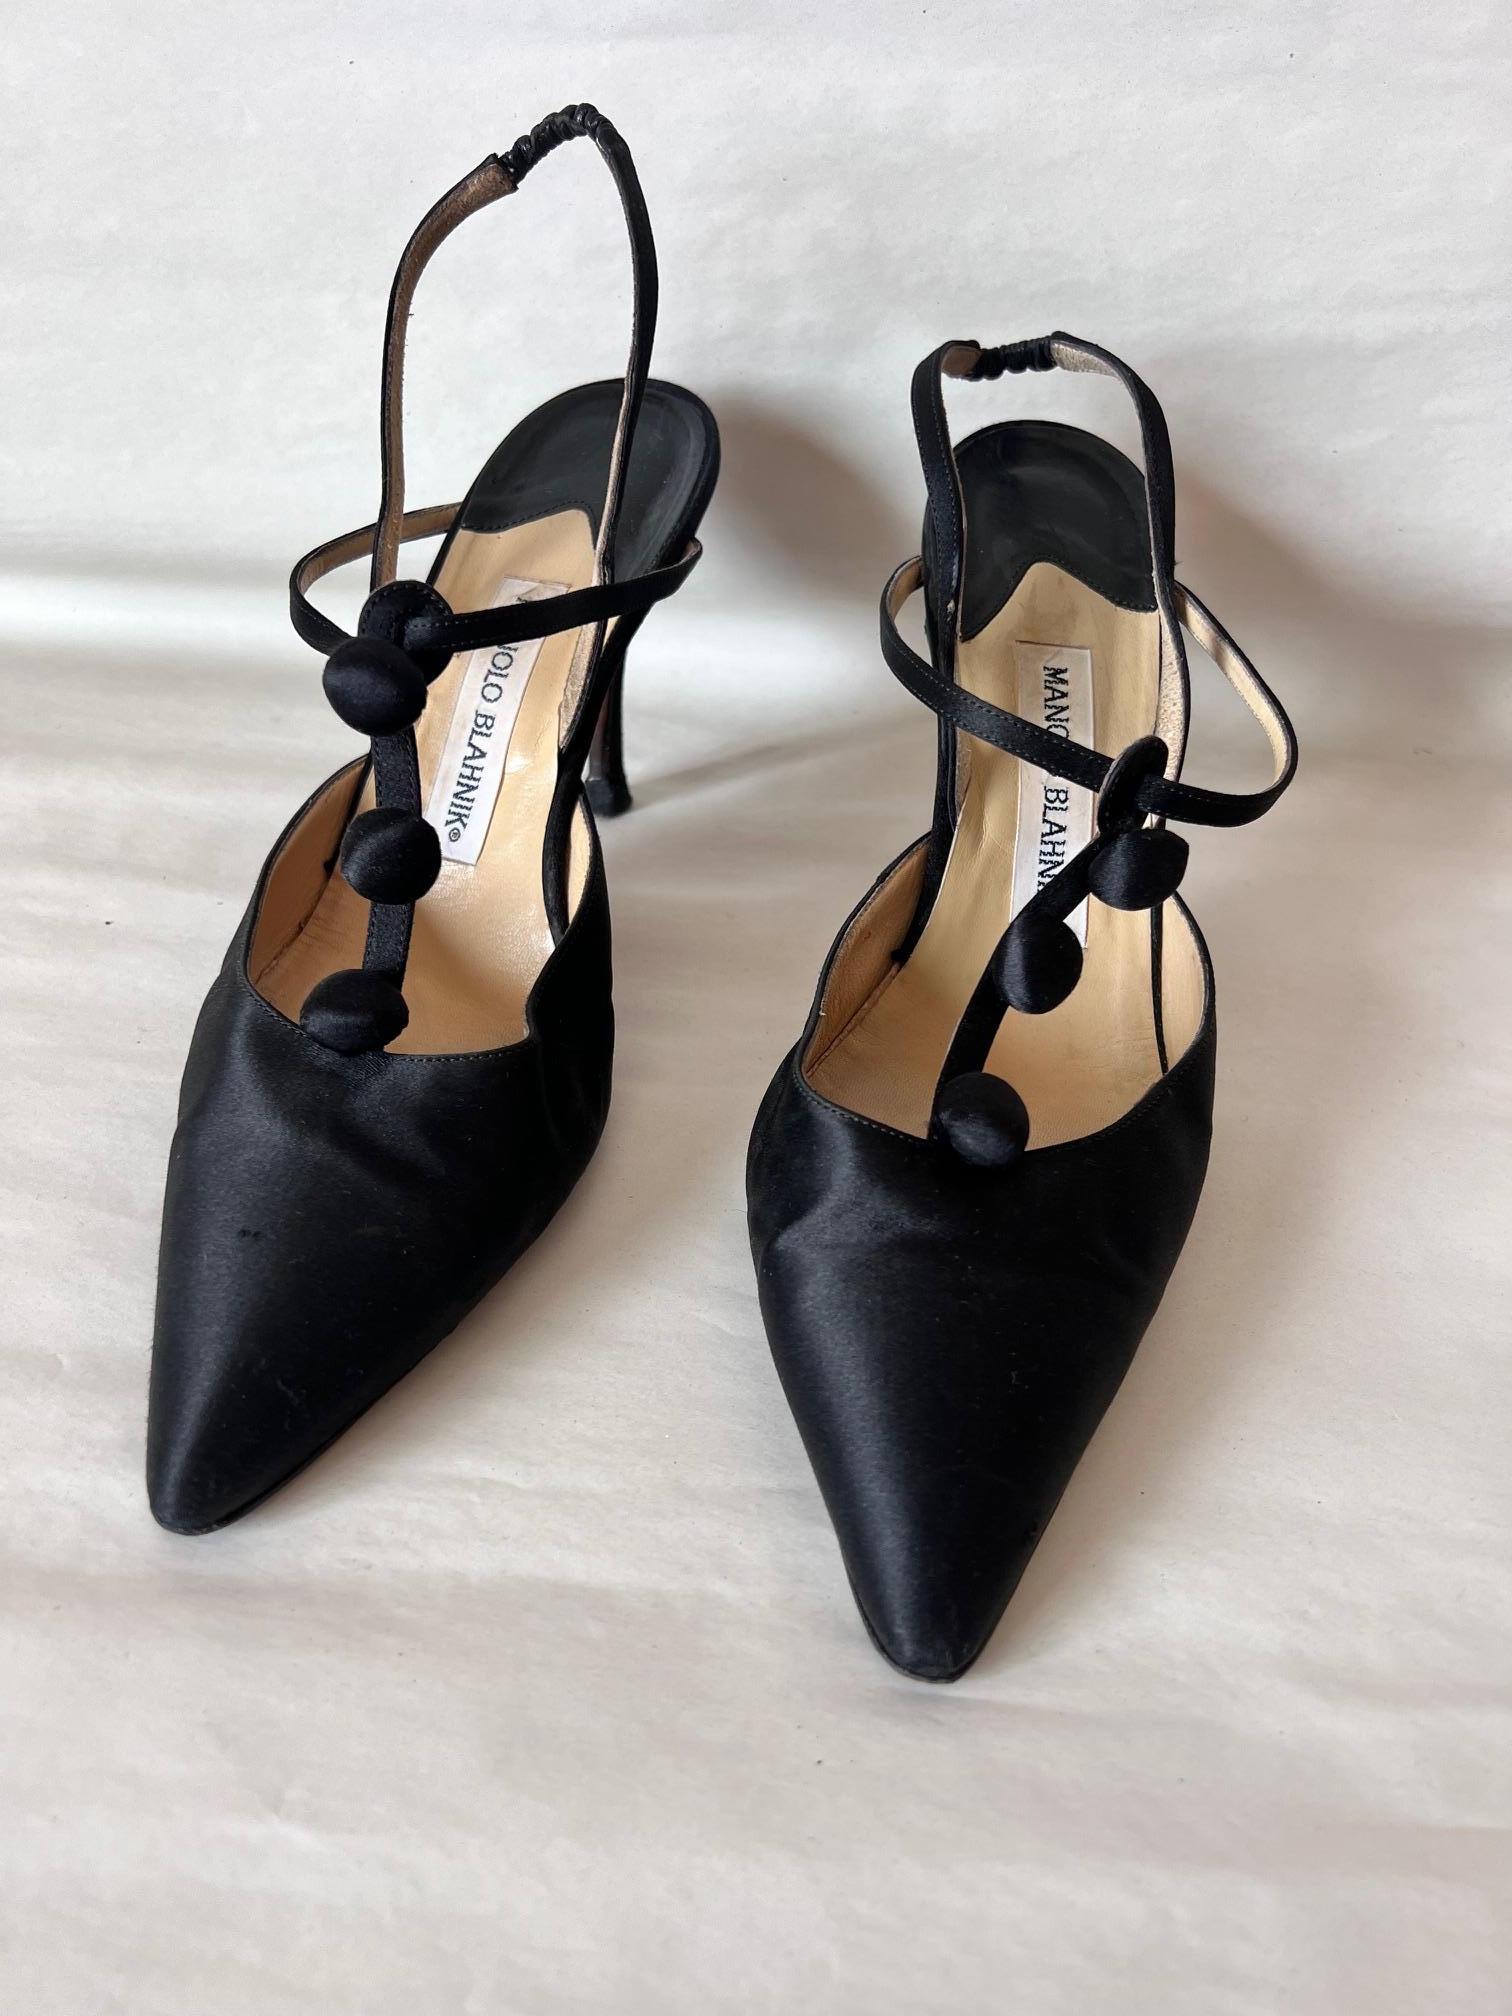 Manolo Blanik Black Satin  Cocktail Button Up Cocktail  Shoes In Good Condition For Sale In  Bilbao, ES